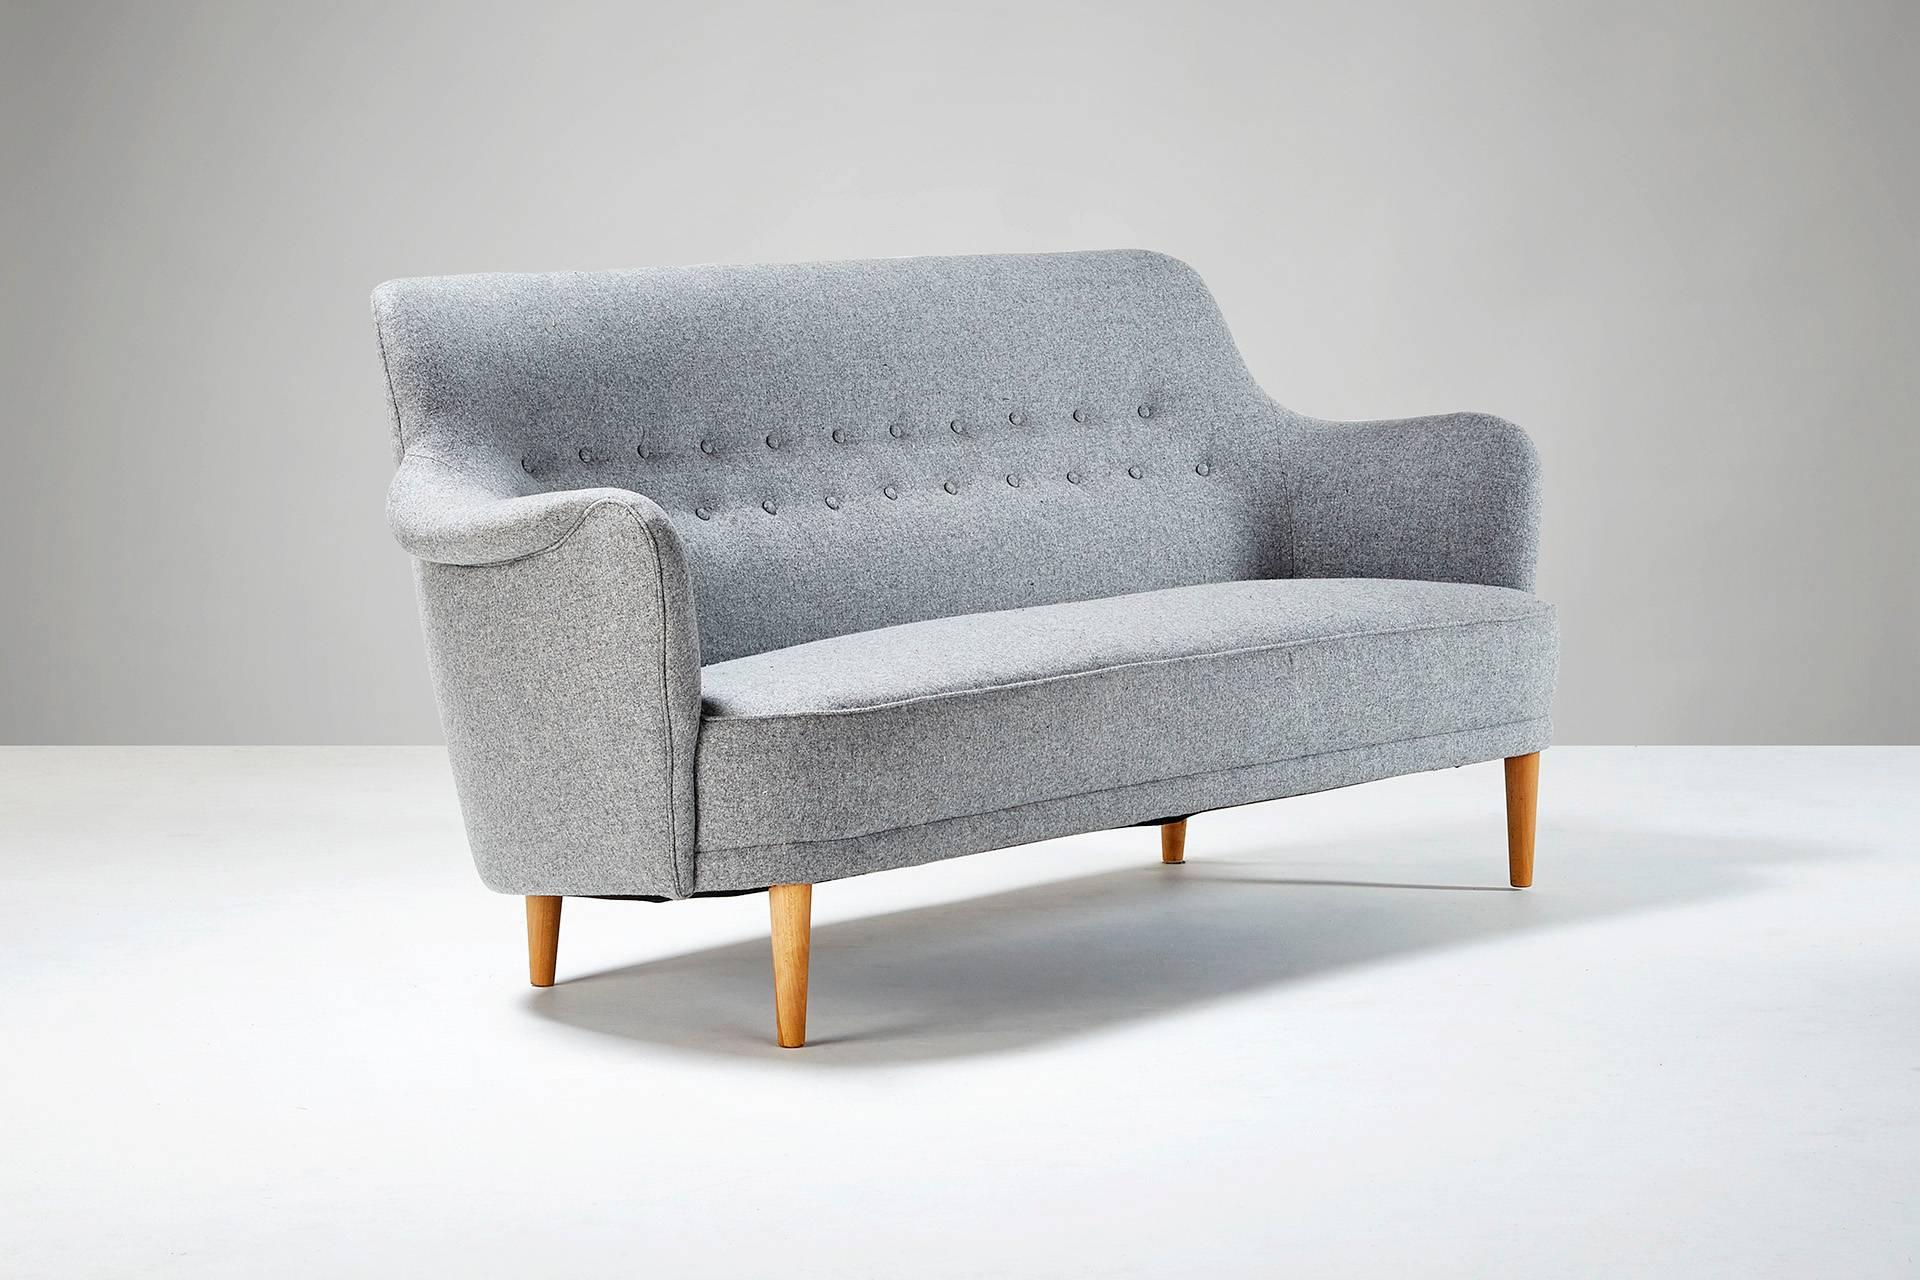 First designed in 1923 for the Stockholm Concert Hall. Produced by O.H. Sjogren, Sweden. Reupholstered in Melton wool fabric from Abraham Moon. Oiled beech legs.